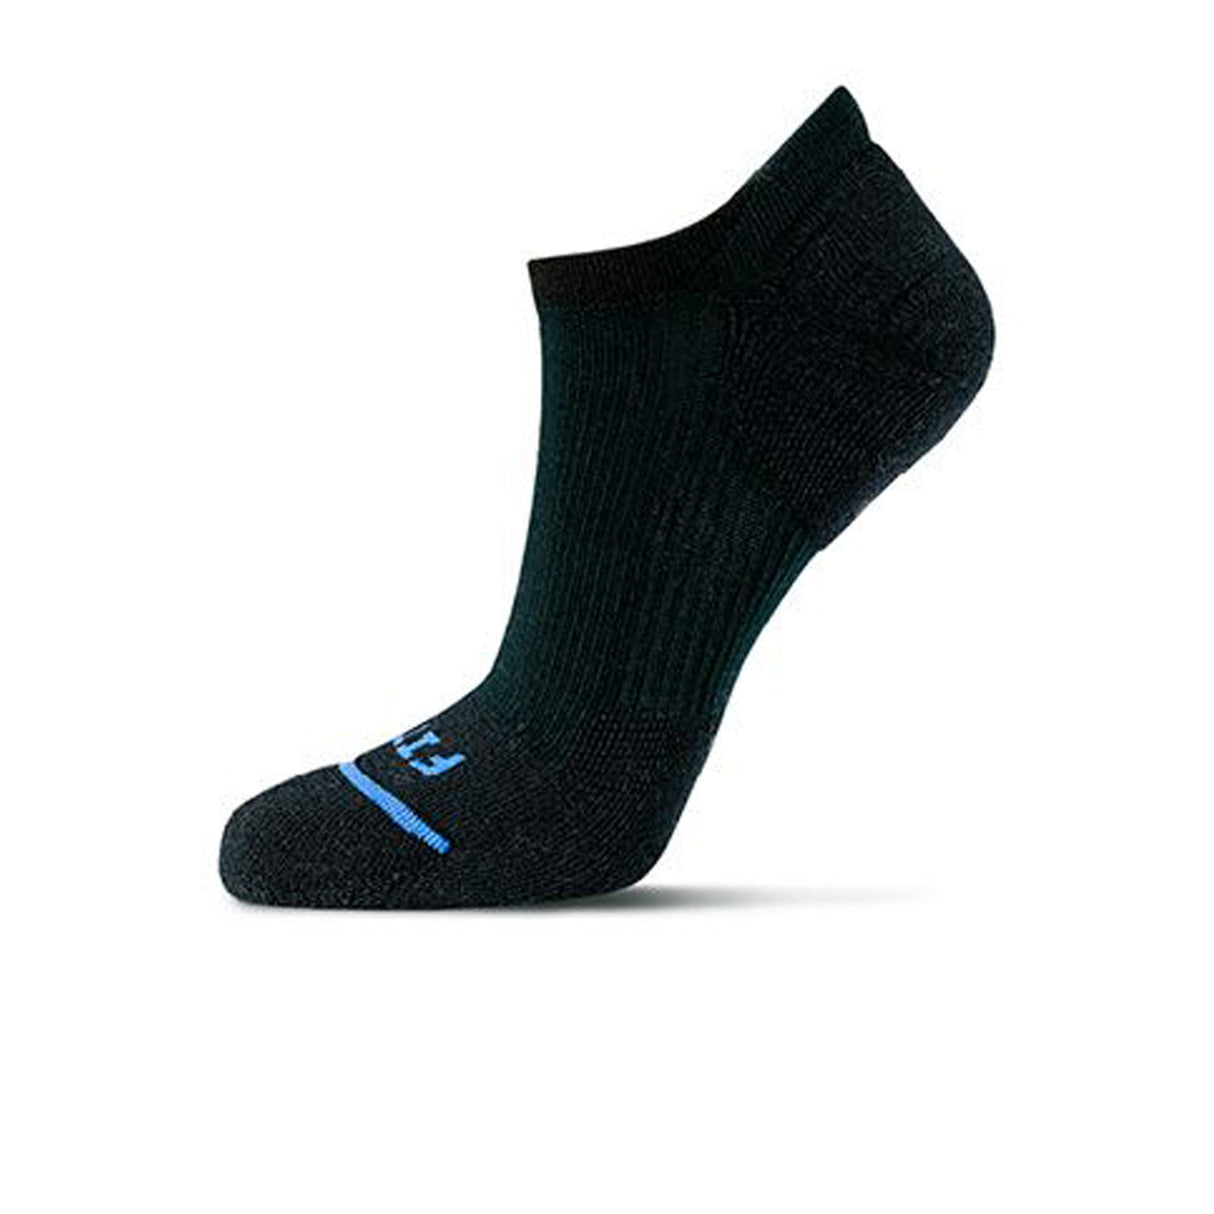 Fits F3200 Light Runner No Show Sock (Unisex) - Black Accessories - Socks - Lifestyle - The Heel Shoe Fitters